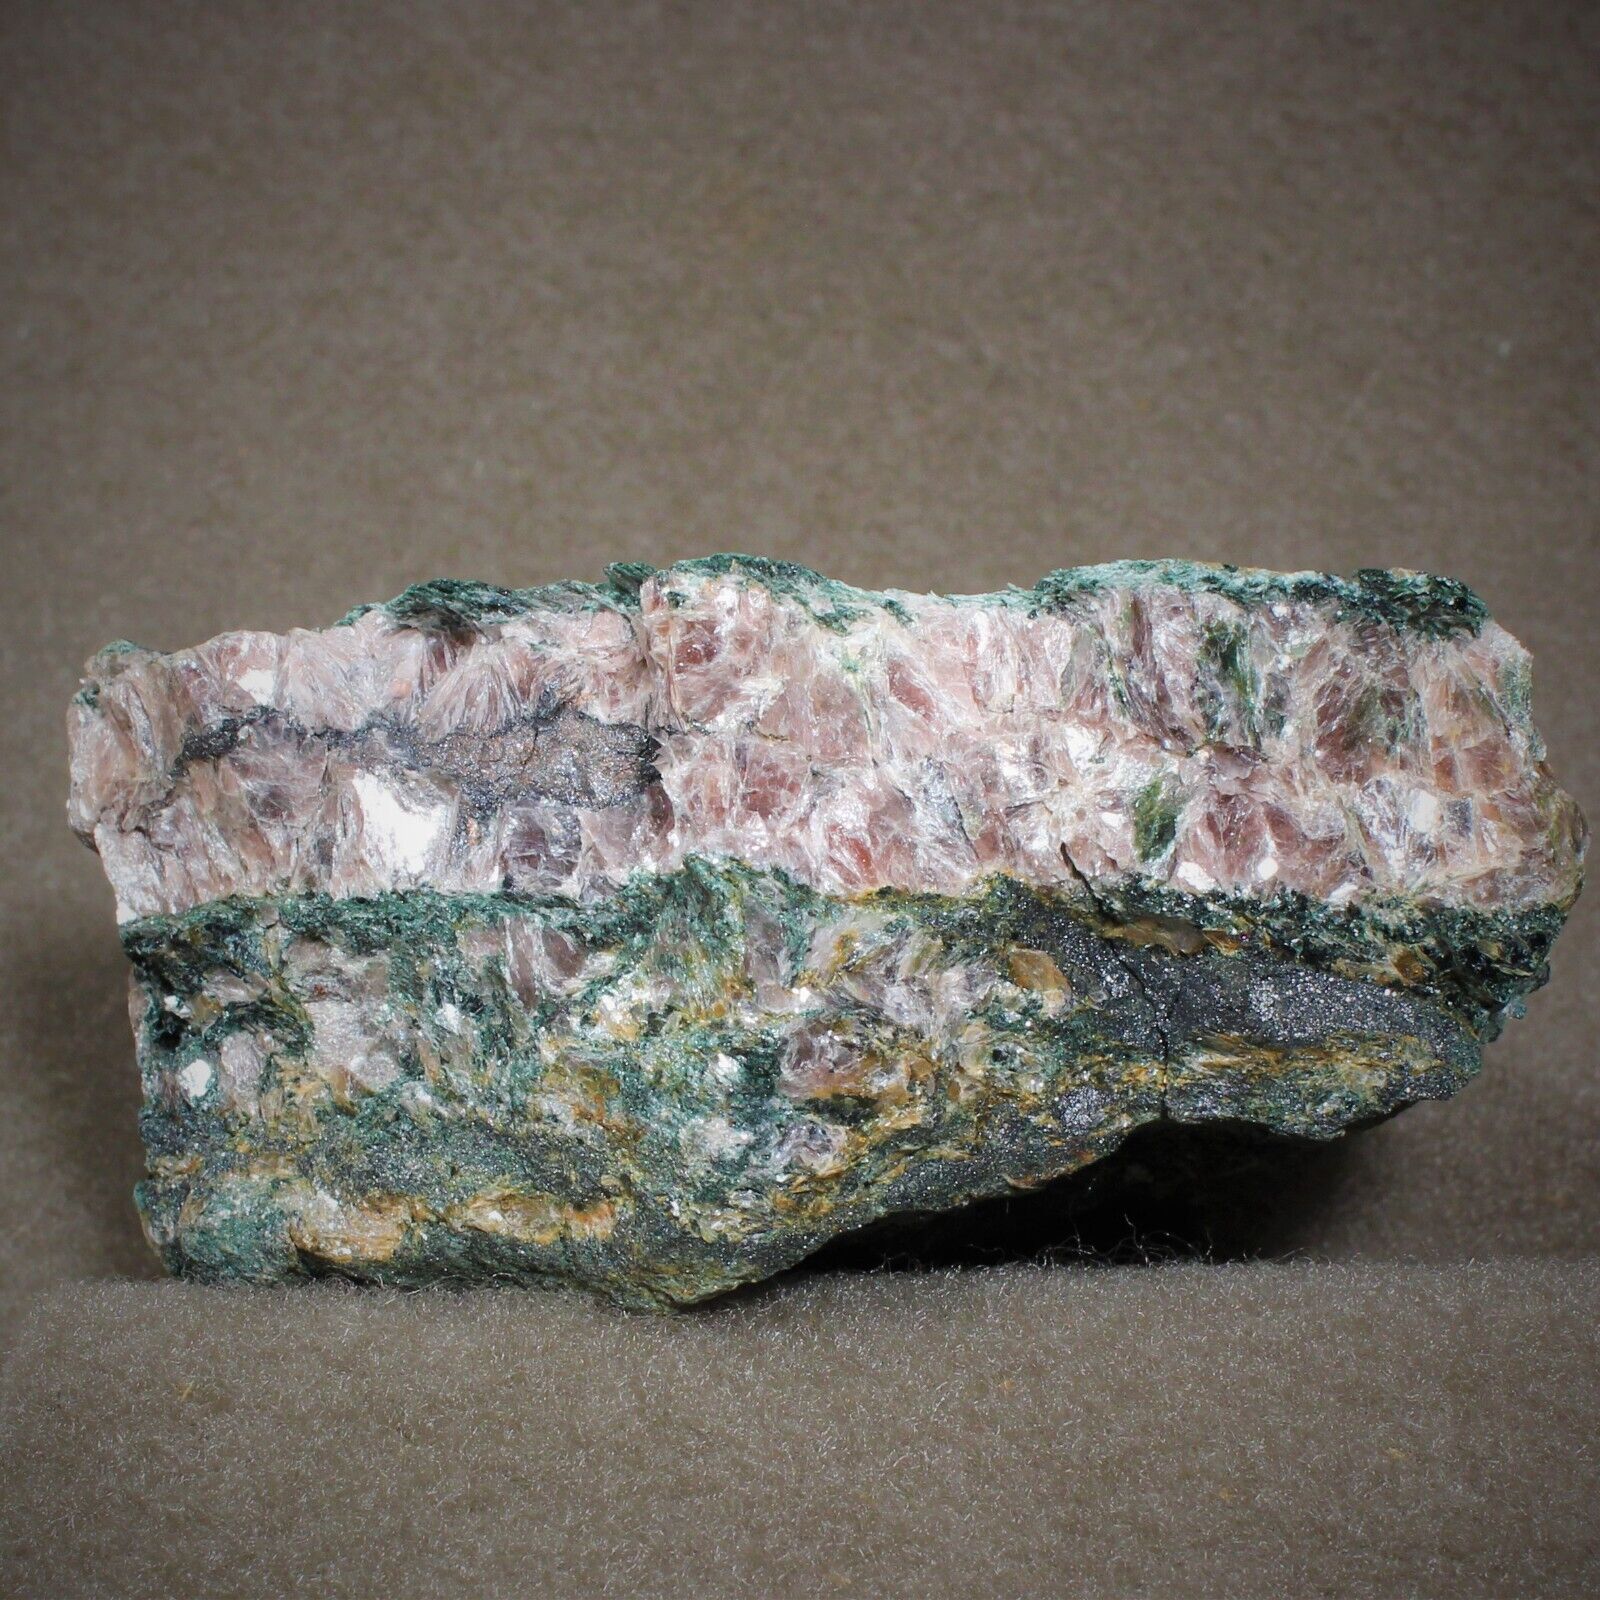 MARGARITE. Exceptional crystals, Chester Emery Mines, Chester, Mass. #4235